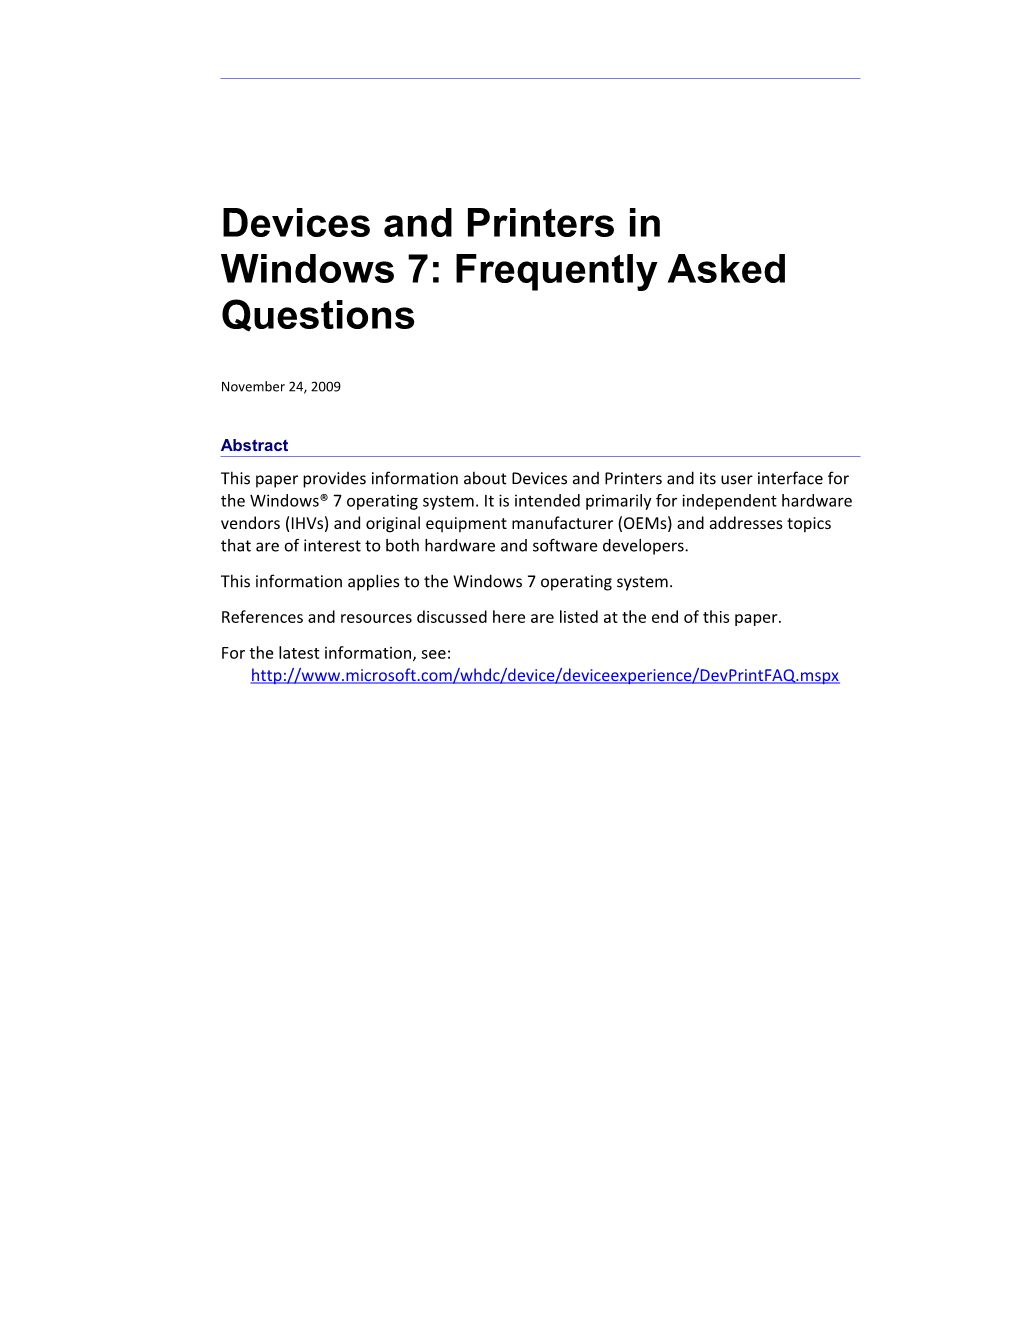 Devices and Printers in Windows7: Frequently Asked Questions - 2